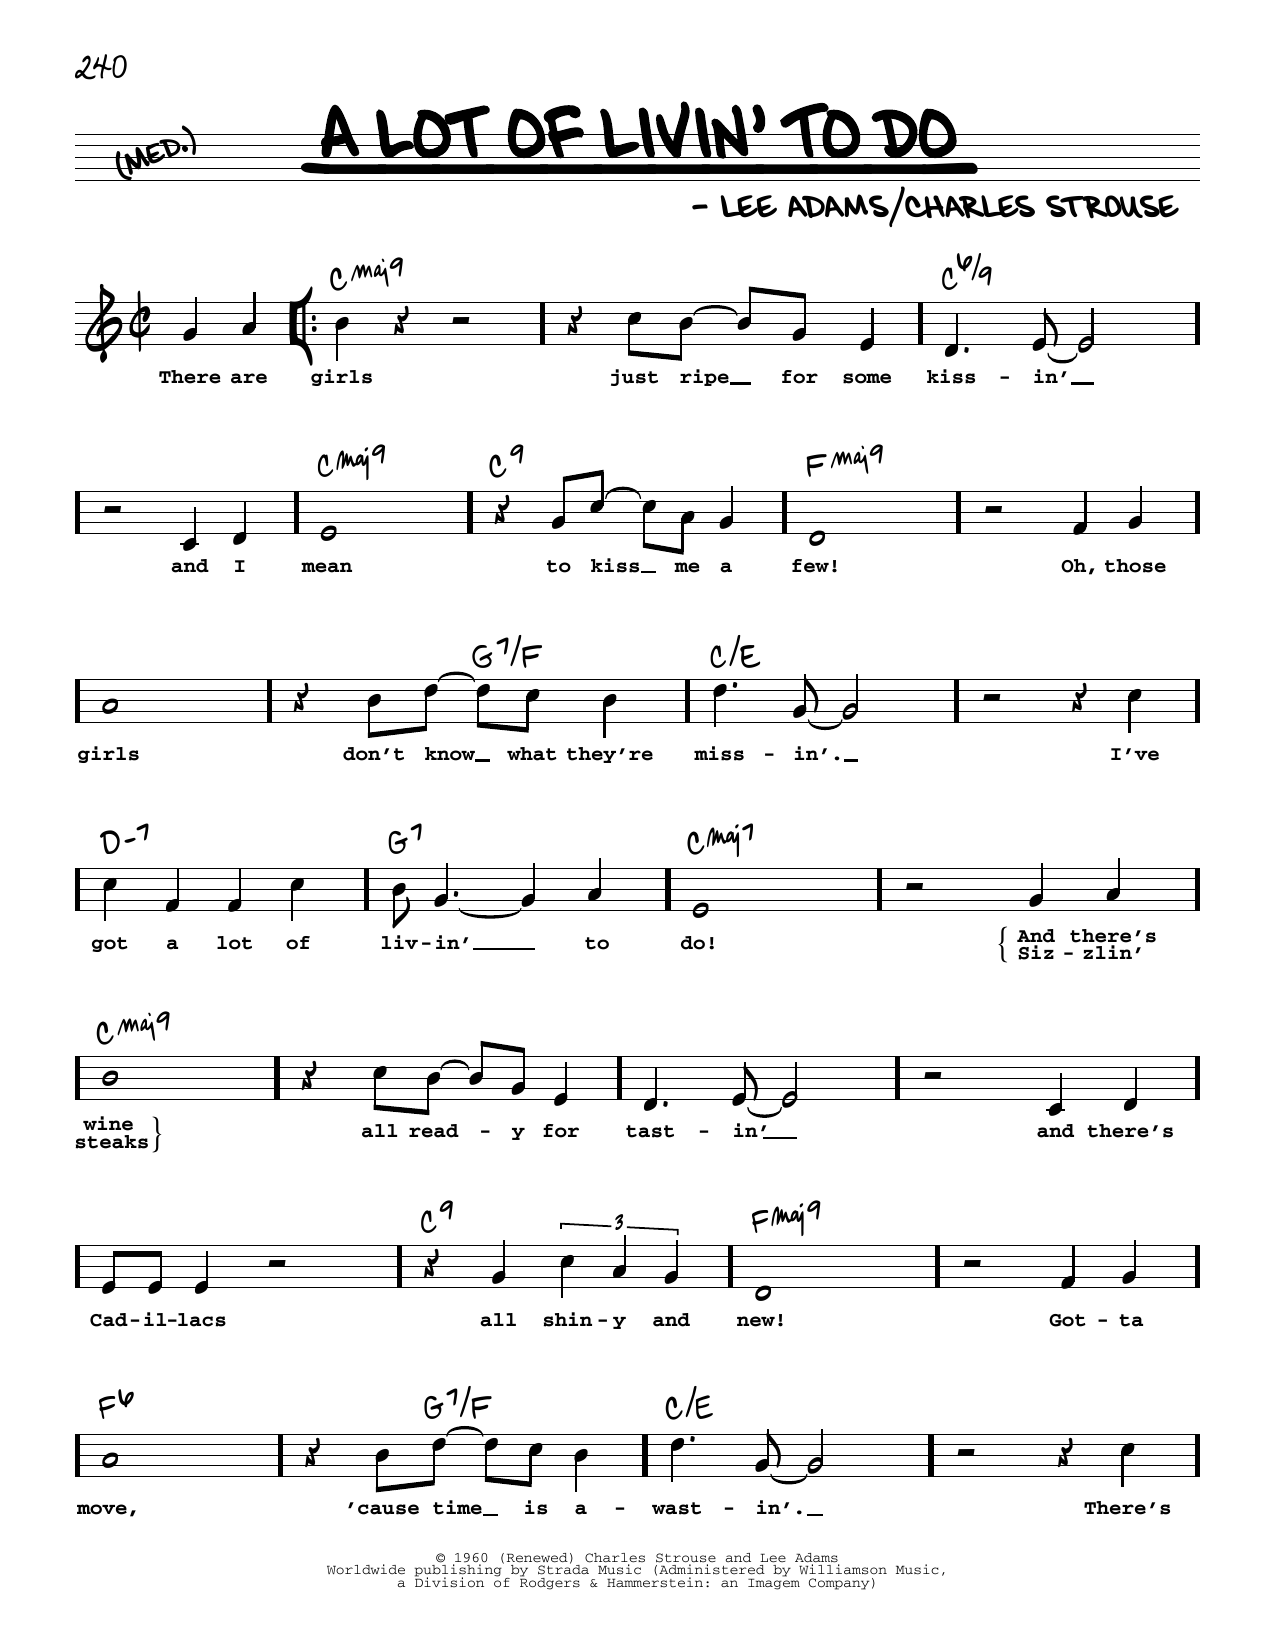 Download Bryan Adams A Lot Of Livin' To Do (High Voice) Sheet Music